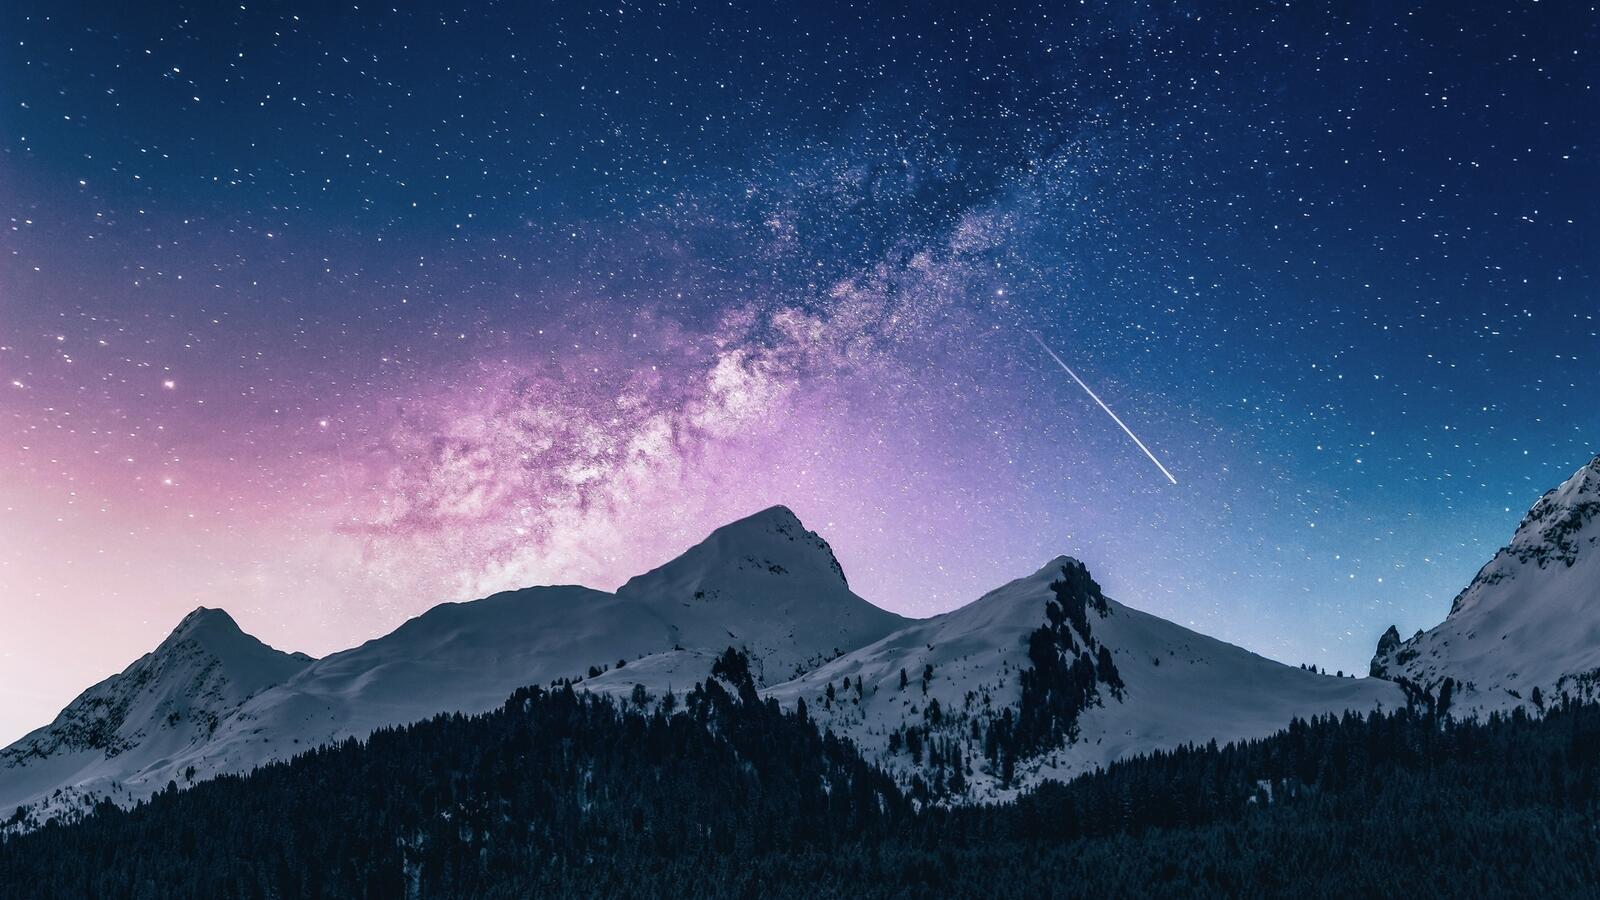 Wallpapers shooting star mountains starry sky on the desktop